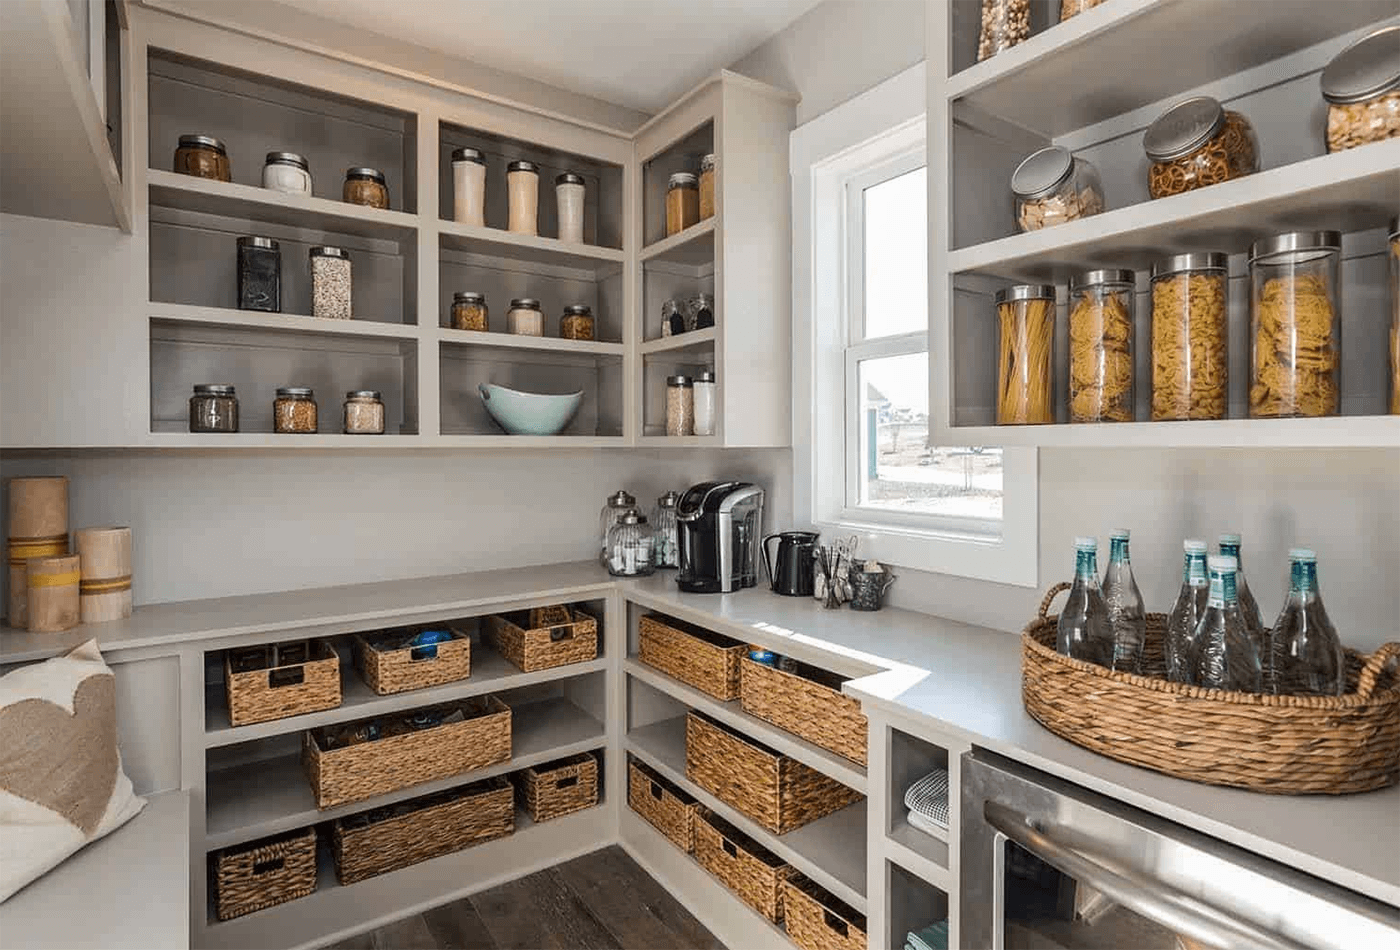 https://dropinblog.net/34246798/files/featured/Kitchen_Pantry_Ideas__Kitchen_Pantry_Layout_Just_for_you.png